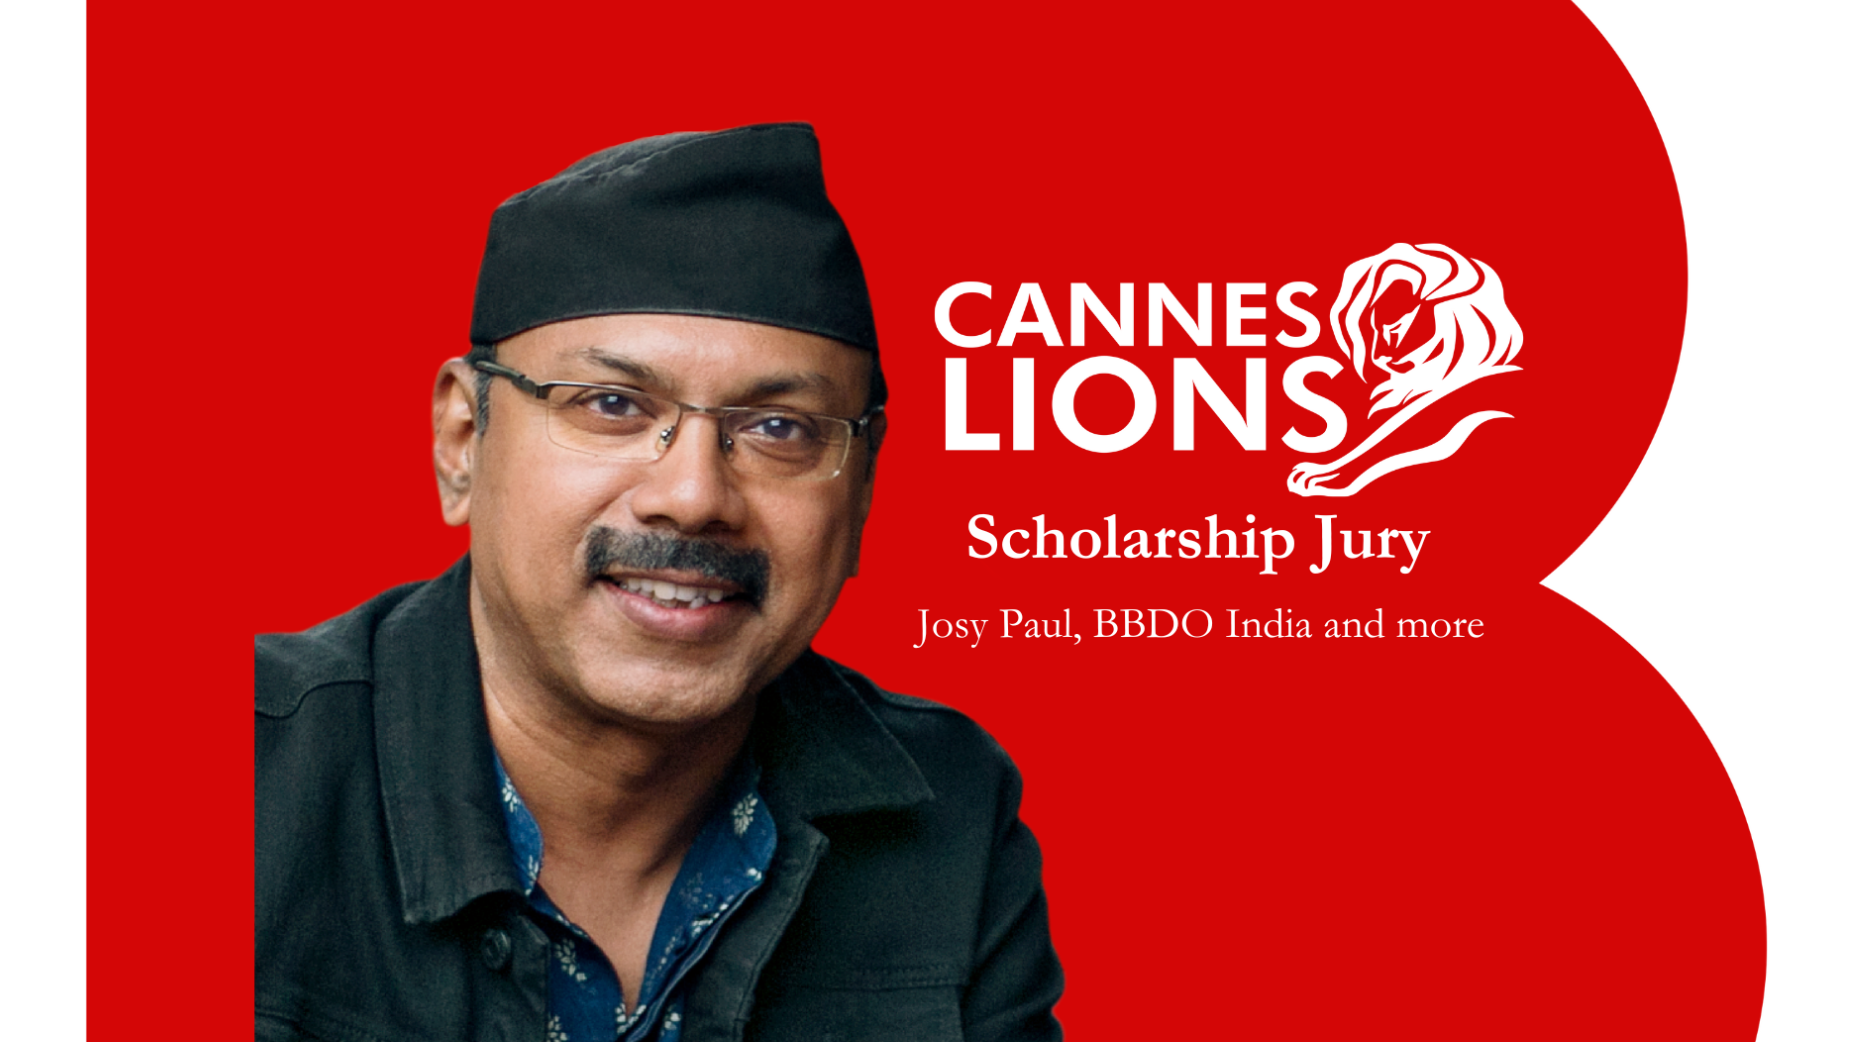 BBDO’s Josy Paul to be on the LIONS Scholarship Jury for Cannes Lions